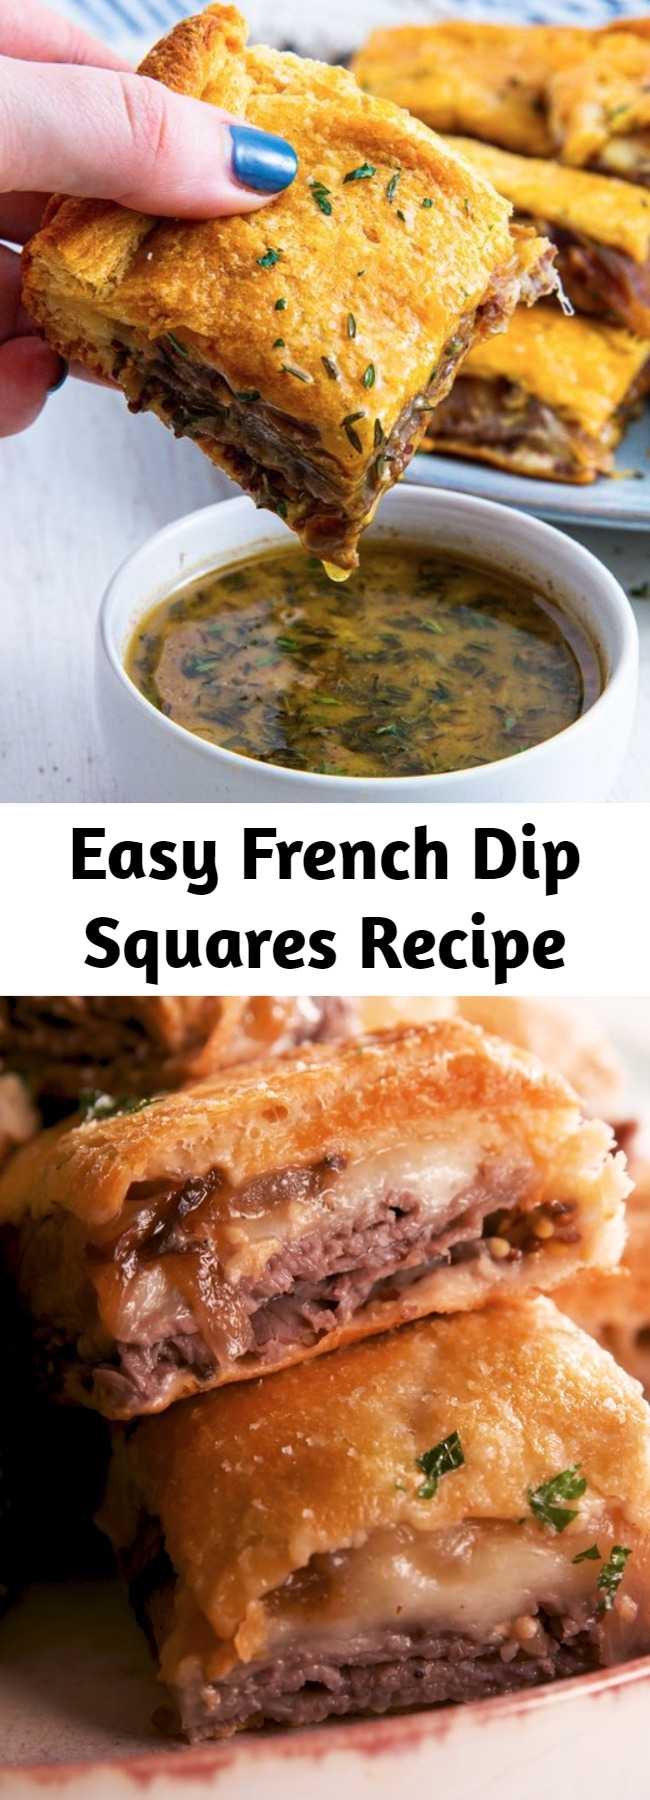 Easy French Dip Squares Recipe - Turns out you don't need fancy ingredients to make the best party appetizer ever. These easy french dip squares are loaded with complex flavors (thanks caramelized onions!) AND there's enough to feed a hungry crowd. #easy #recipe #frenchdip #bites #appetizer #entertaining #sandwich #party #oven #roastbeef #caramelizedonions